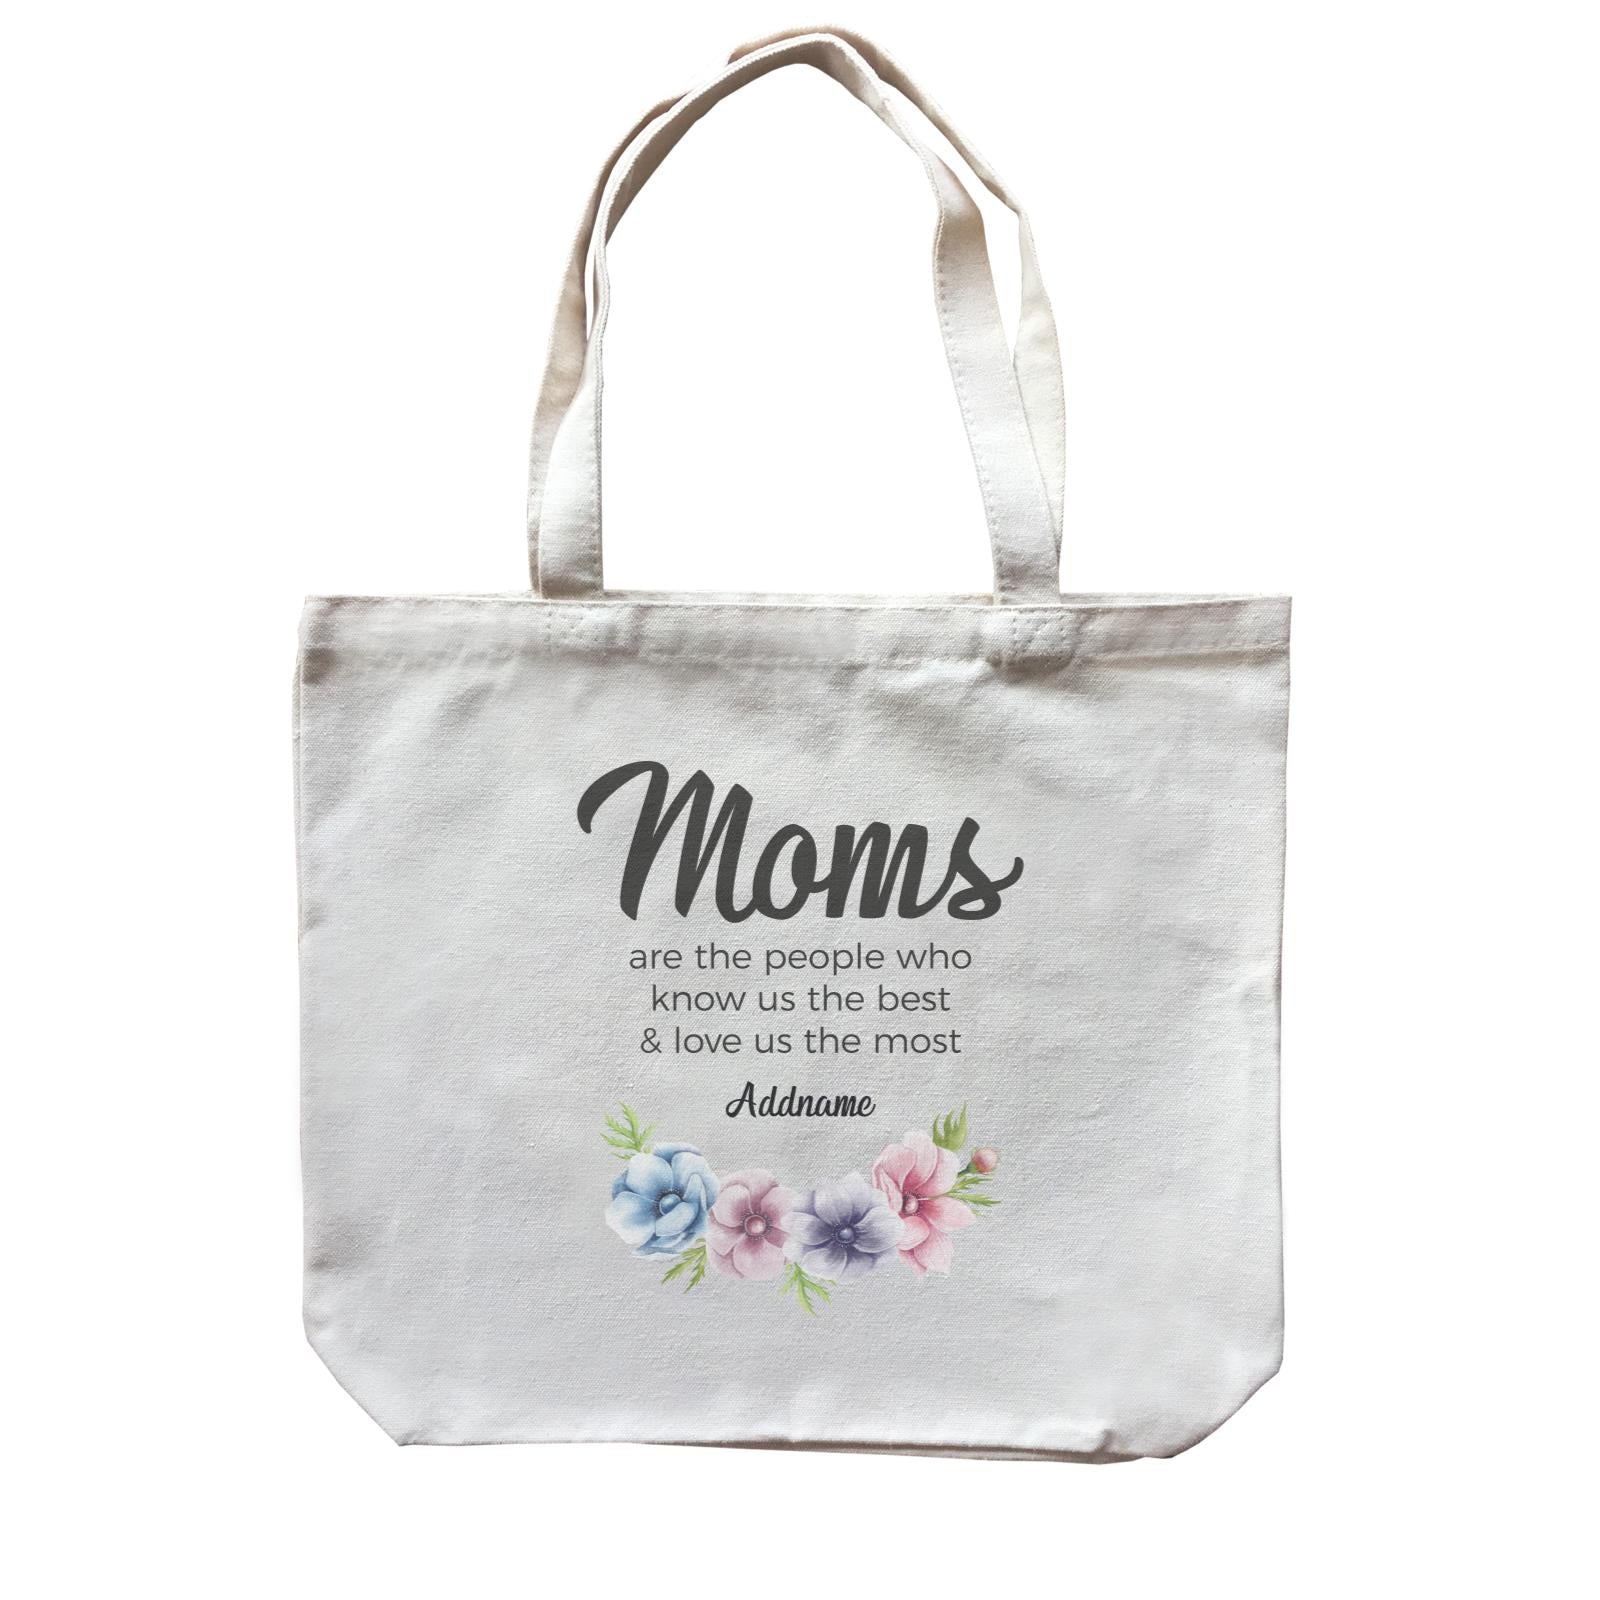 Sweet Mom Quotes 1 Moms Are The People Who Know Us The Best & Love Us The Most Addname Canvas Bag